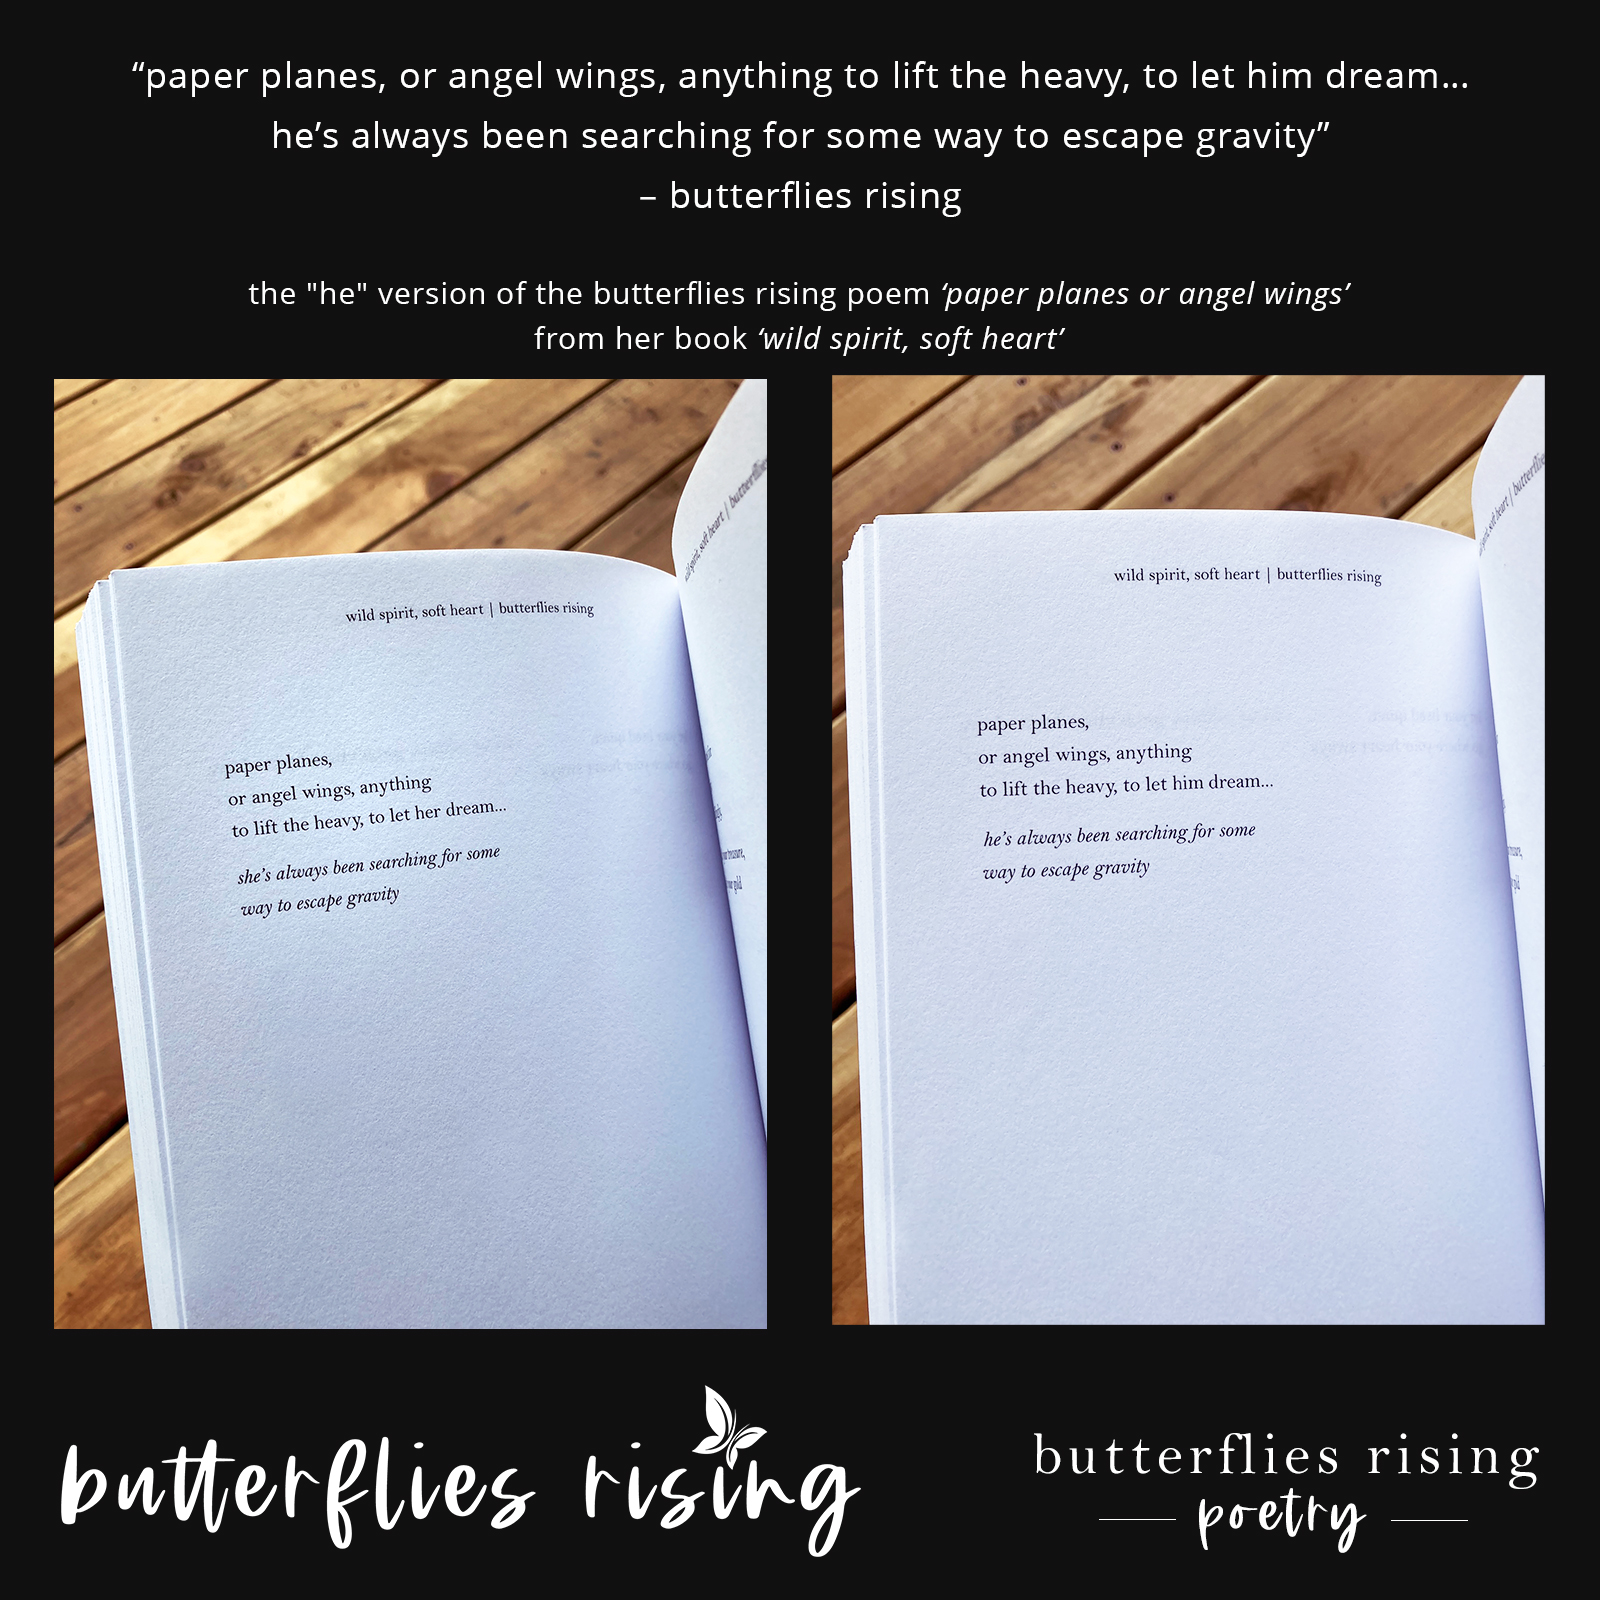 paper planes, or angel wings, anything to lift the heavy, to let him dream - butterflies rising